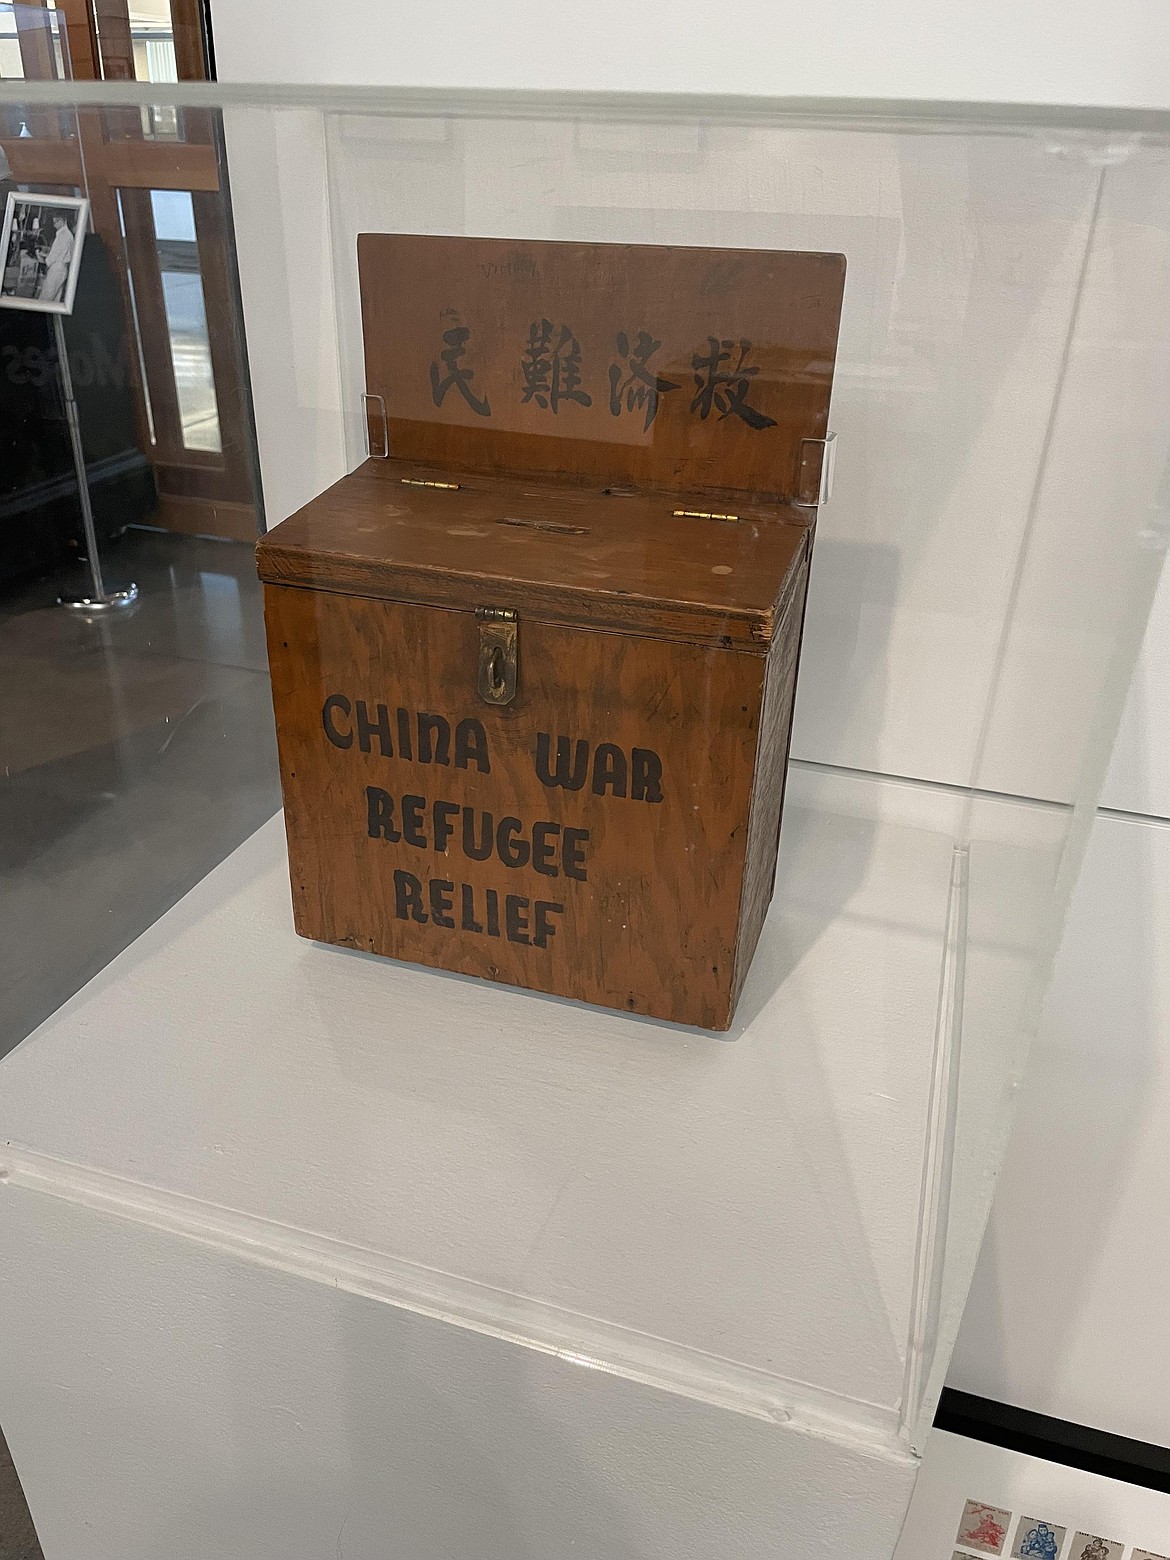 A collection box for coins intended for Chinese refugee relief during WWII.